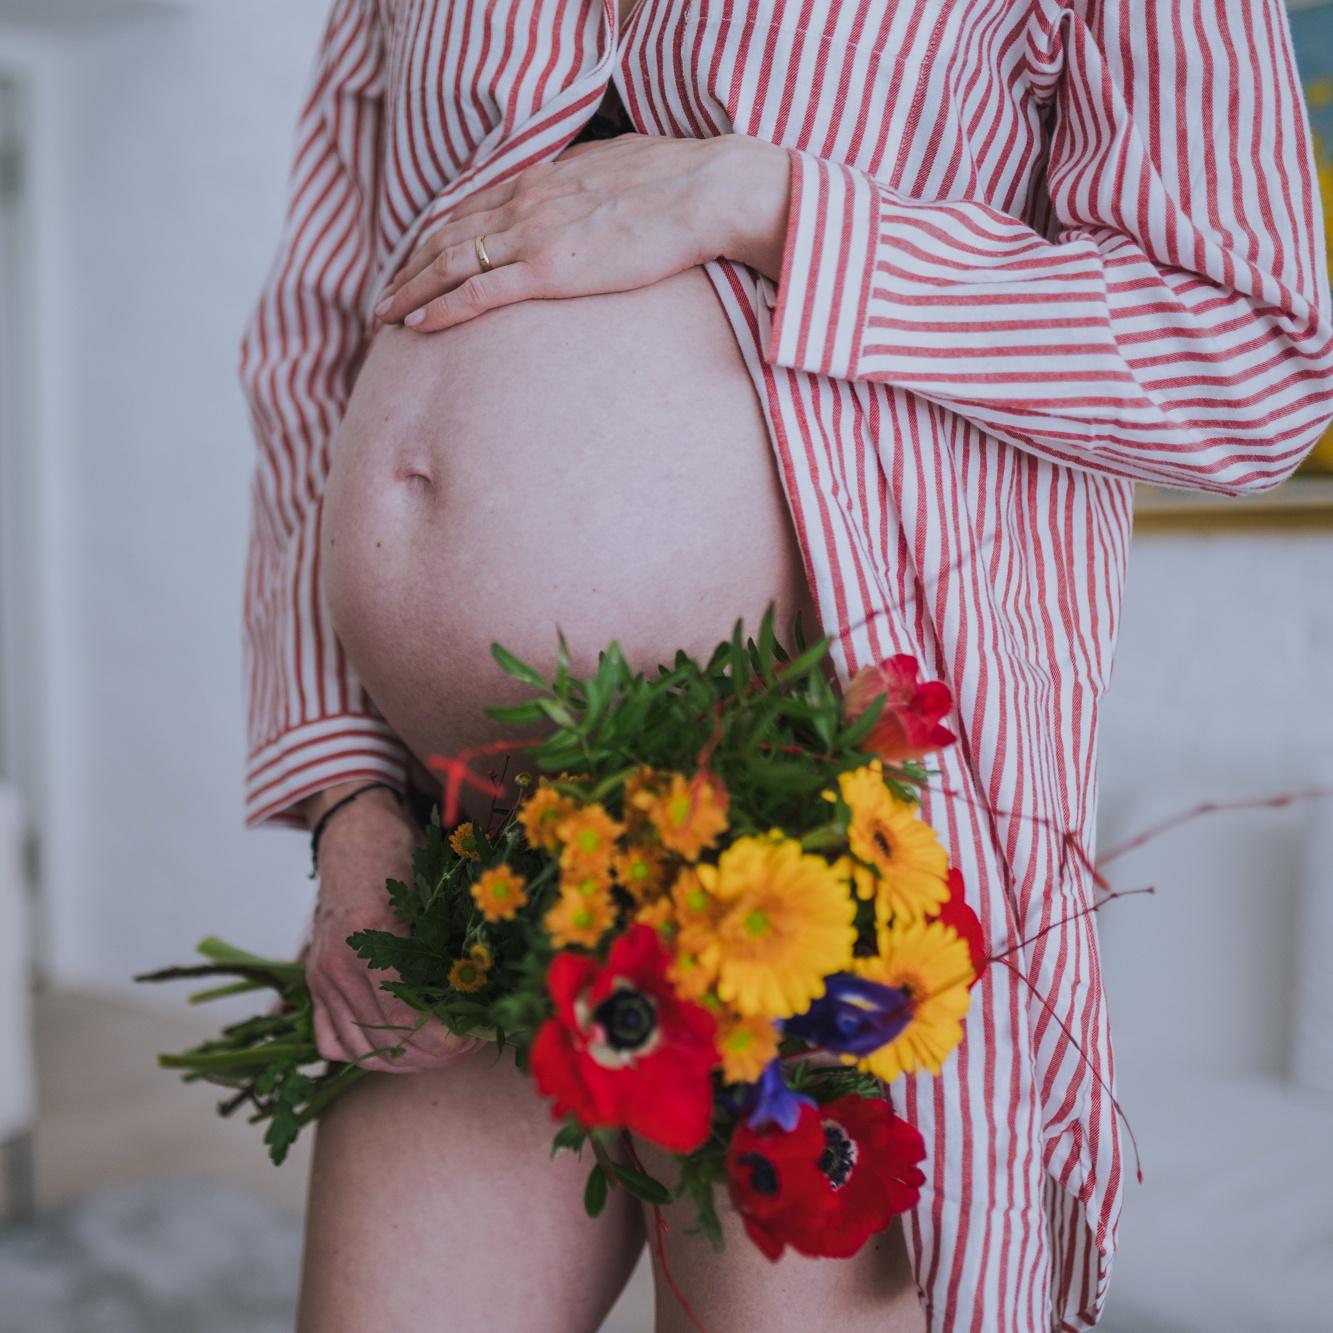 Pregnant woman, holding one hand on her large belly and the other holding a bouquet of flowers.